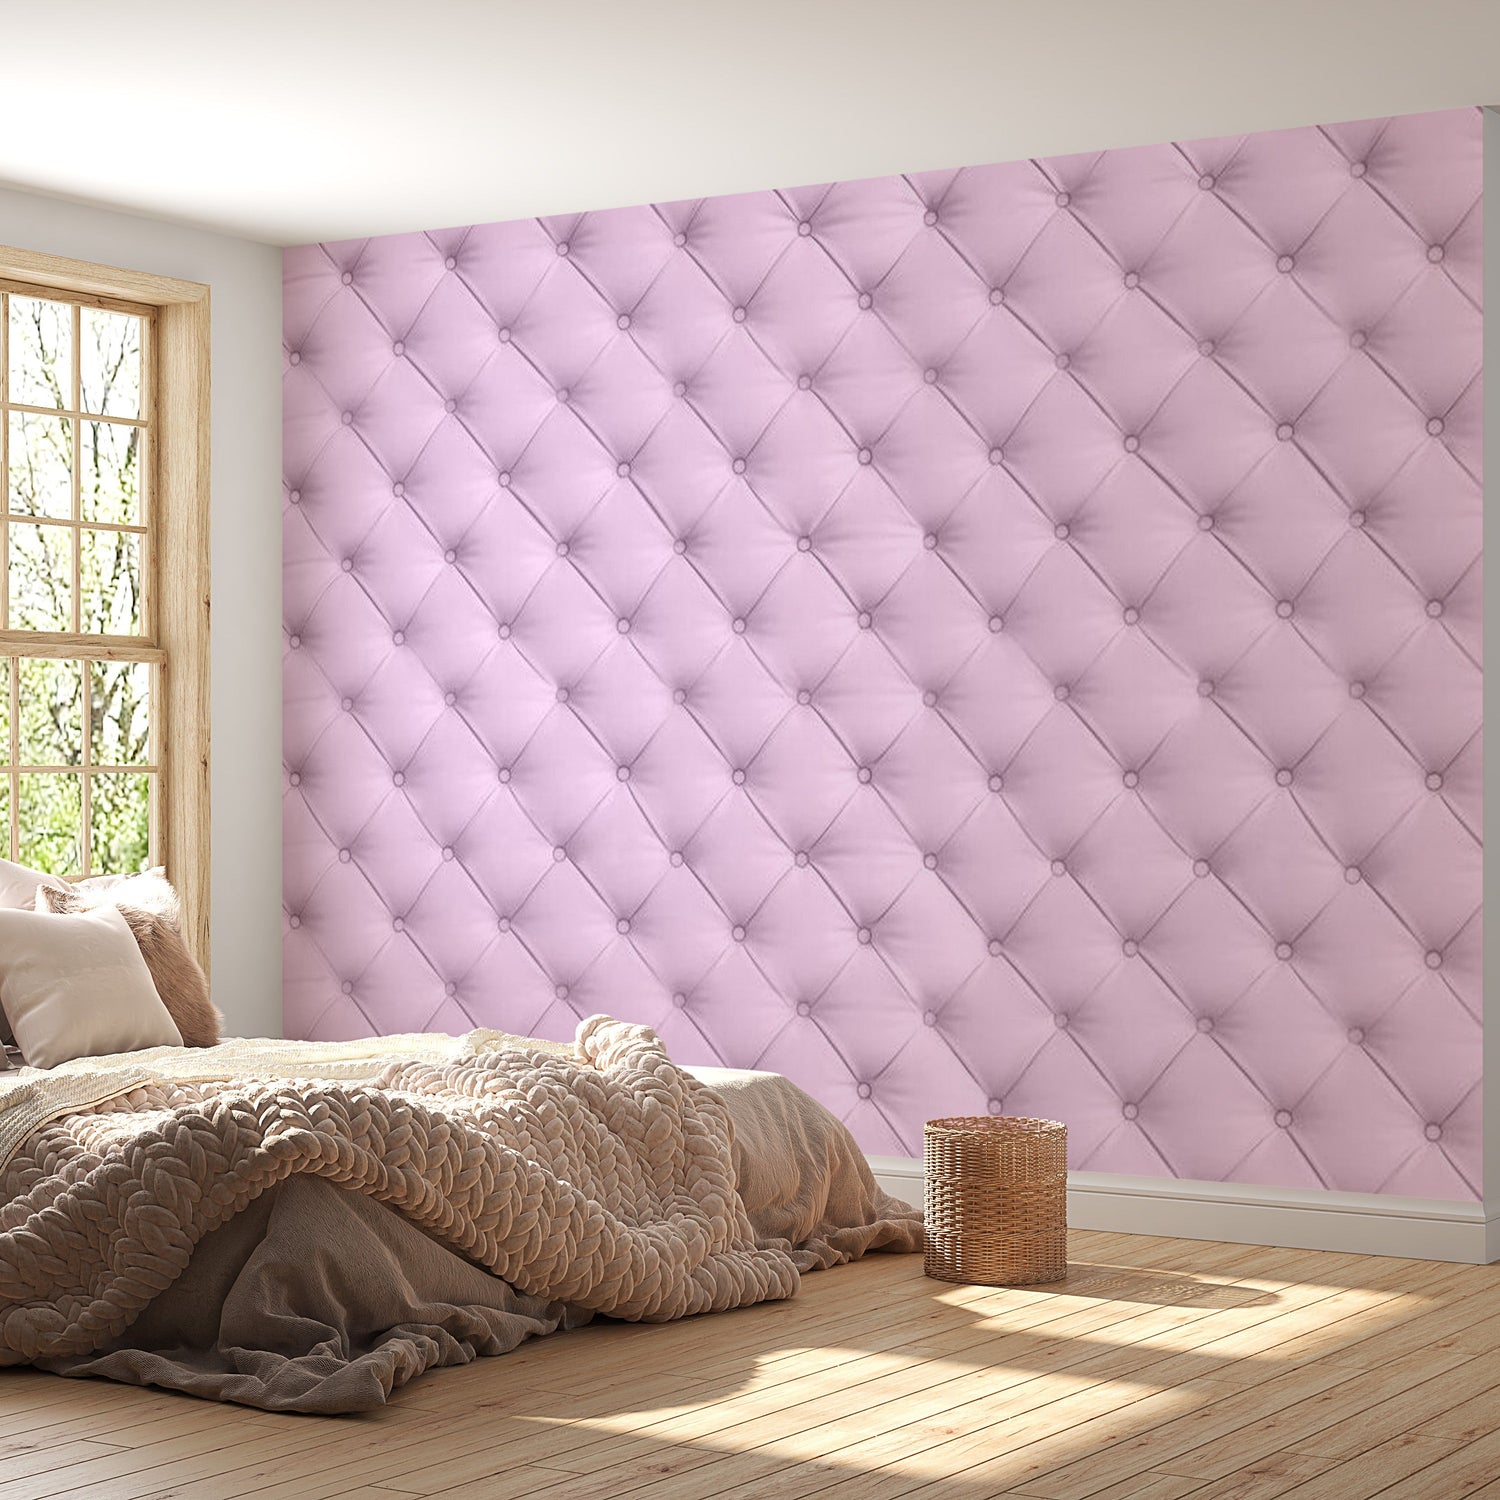 Peel & Stick Wall Mural - Soft Pink Chesterfield Pattern - Removable Wall Decals